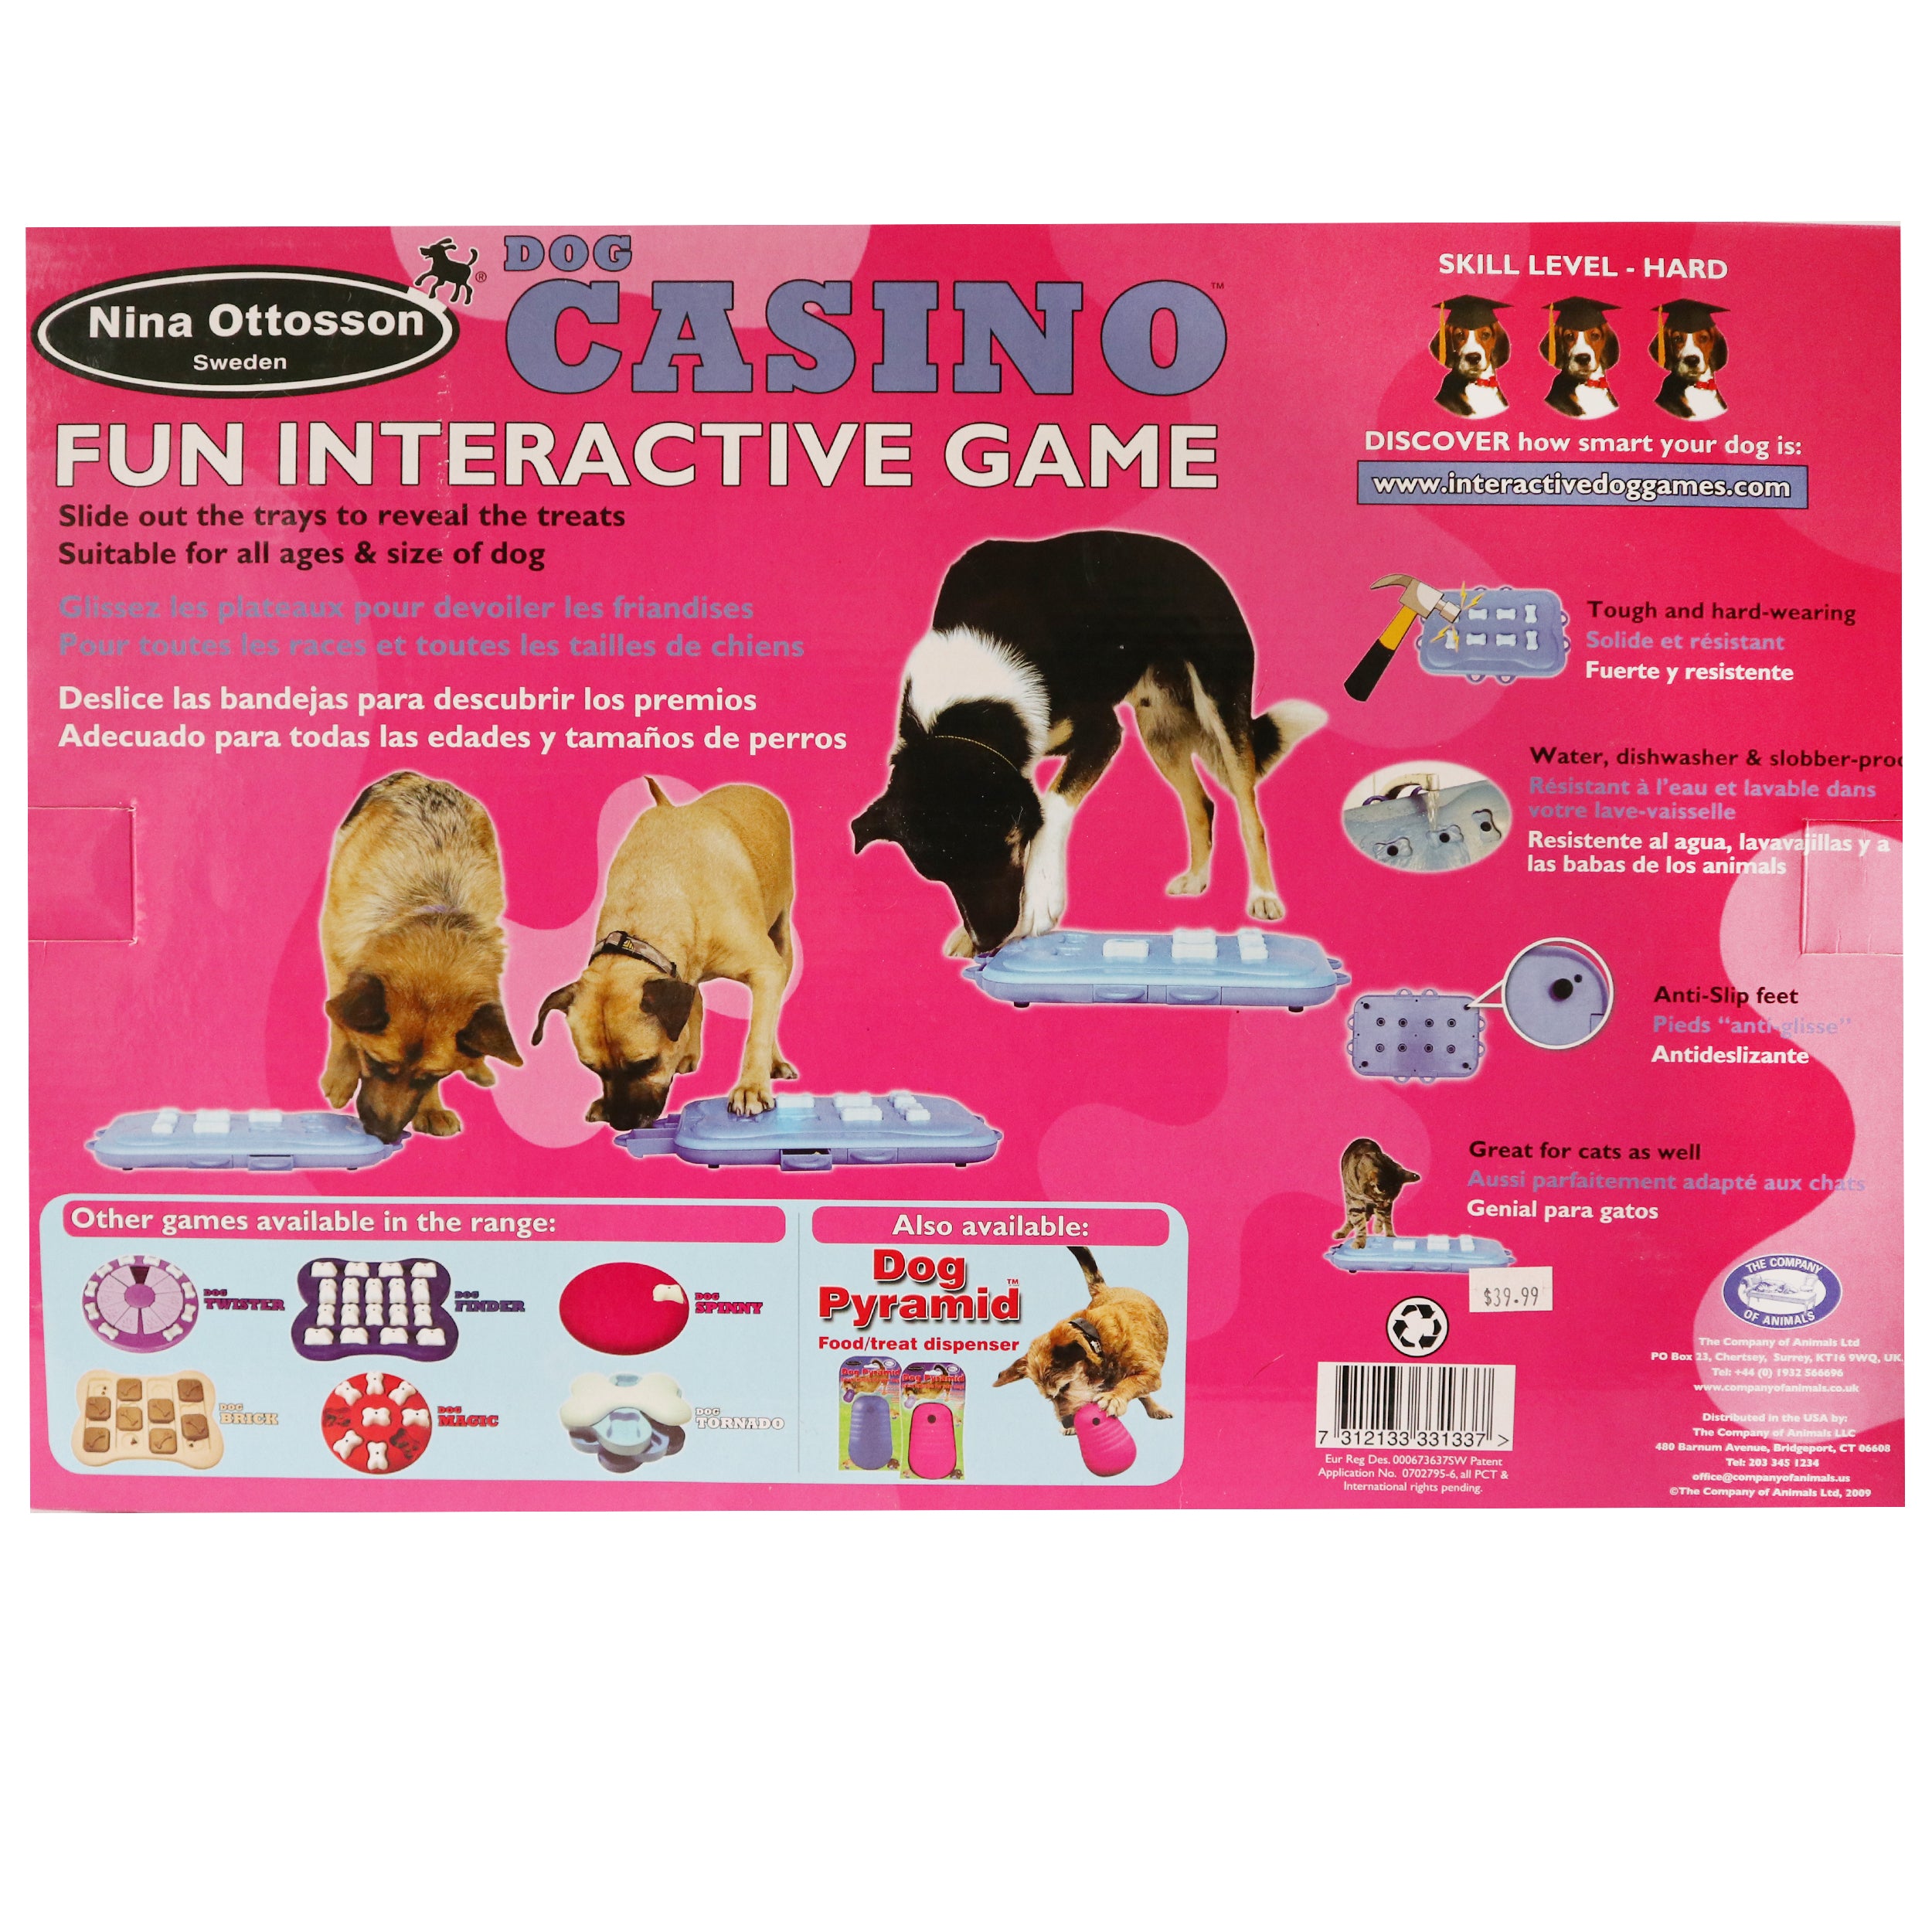 DOG CASINO - NEW - Nina Ottosson Treat Puzzle Games for Dogs & Cats